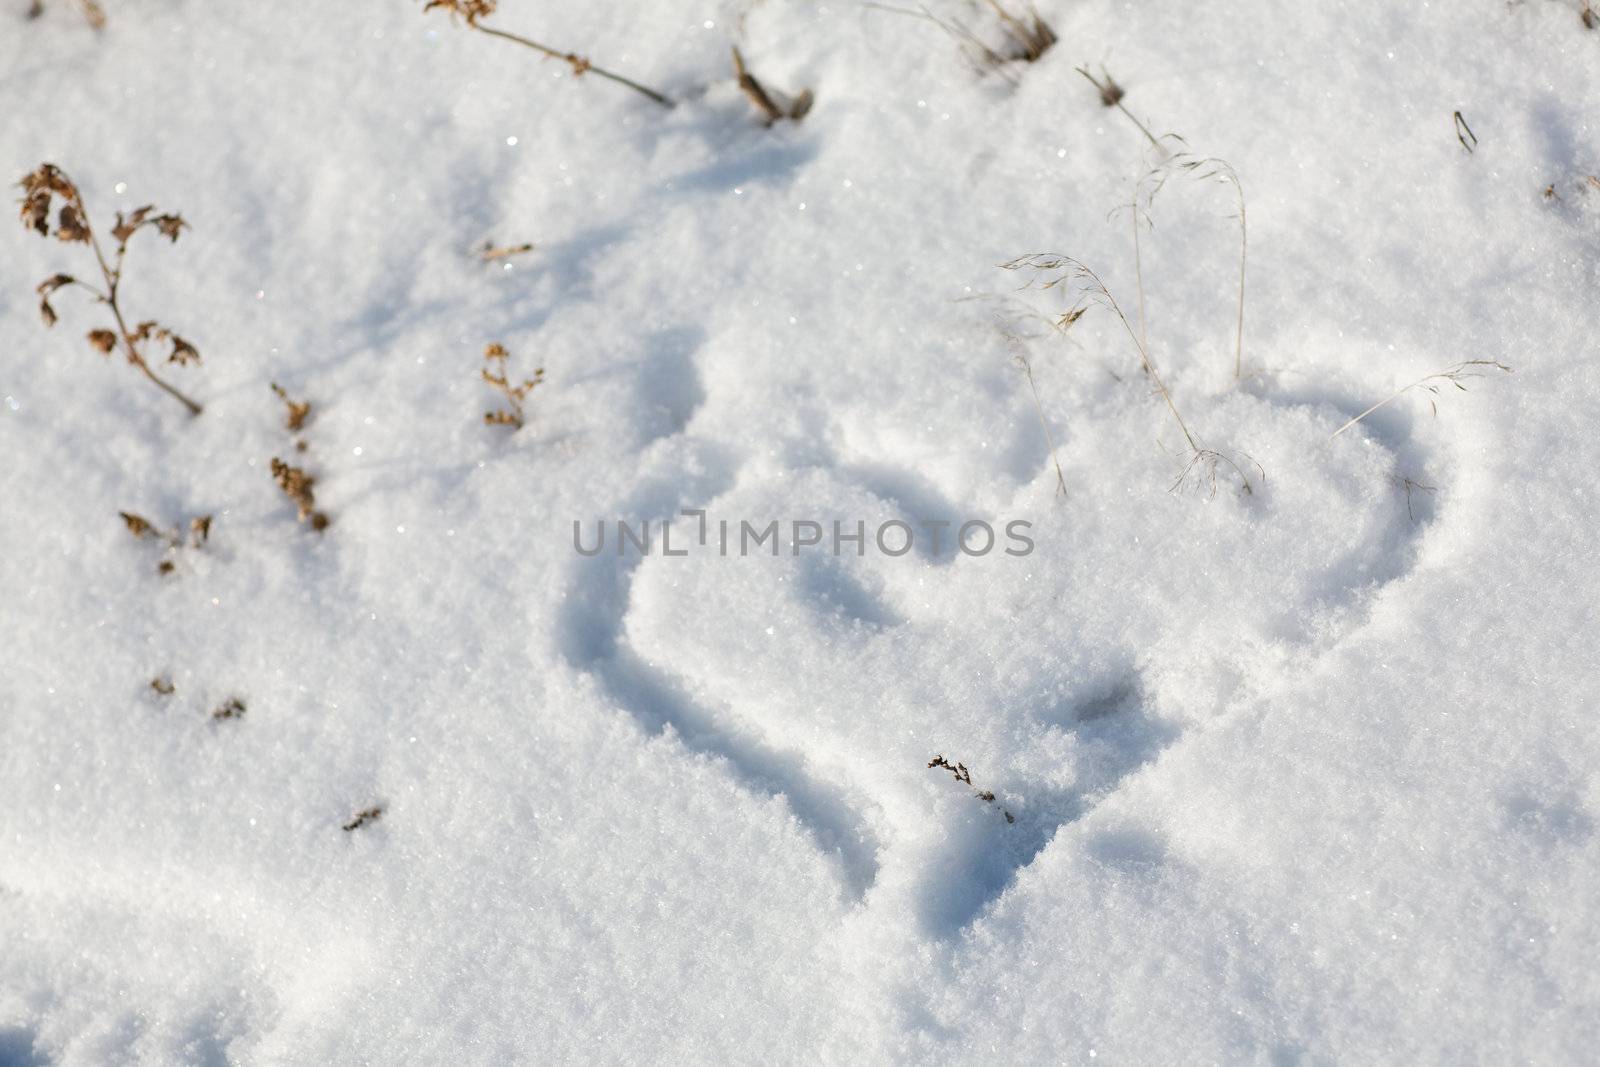 drawing of a heart on the snow